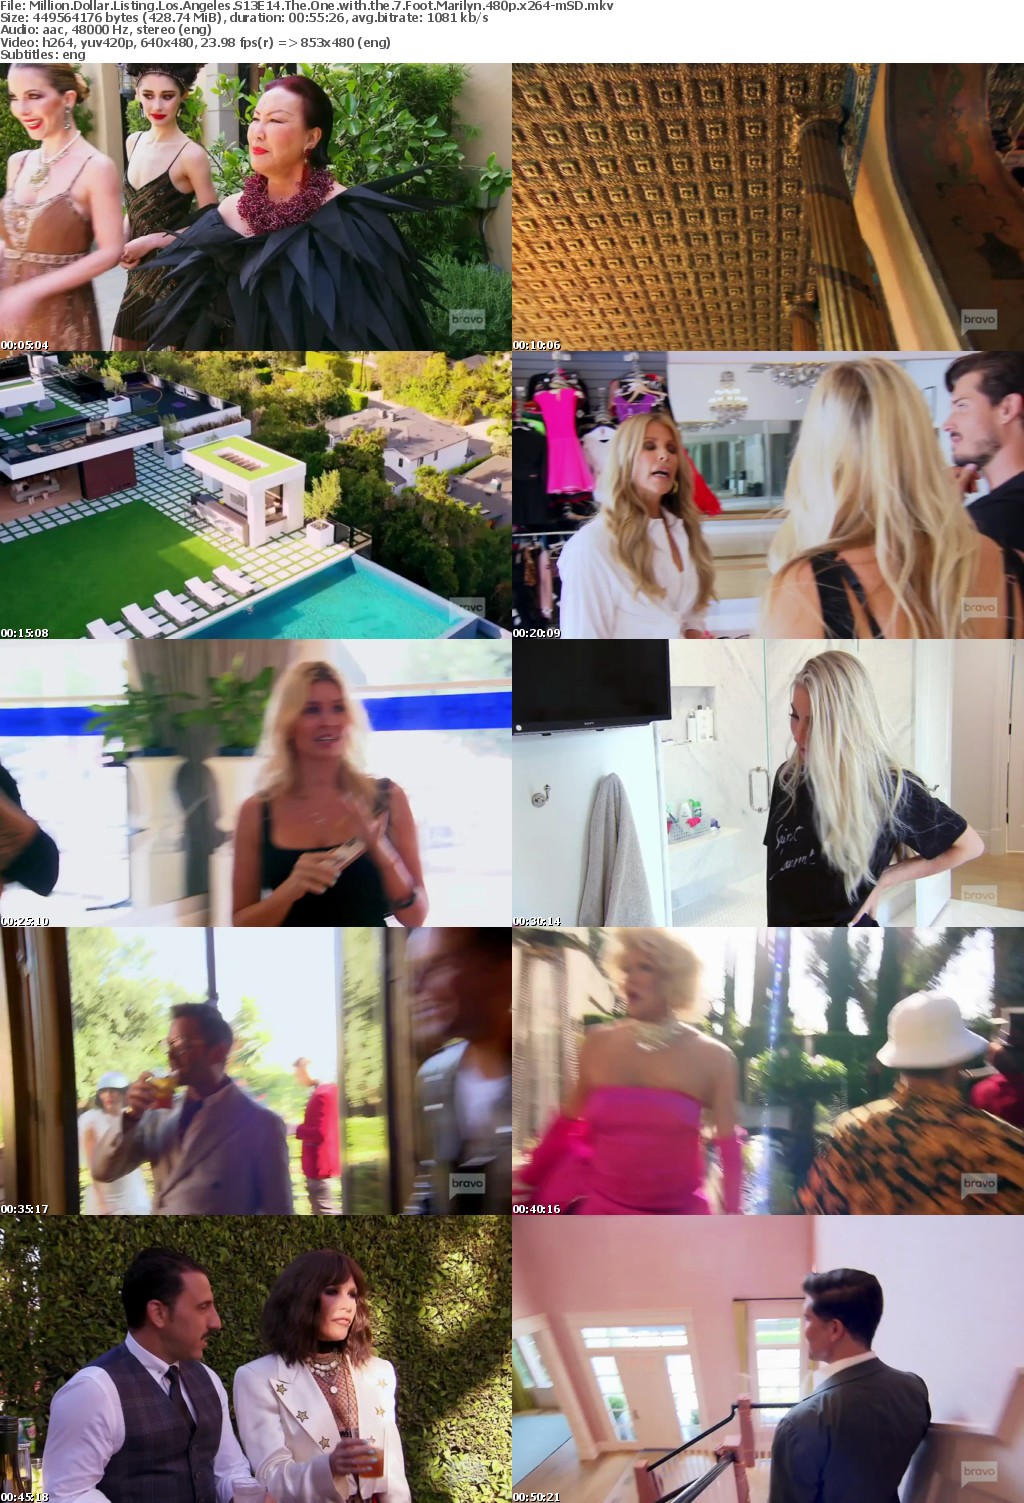 Million Dollar Listing Los Angeles S13E14 The One with the 7 Foot Marilyn 480p x264-mSD